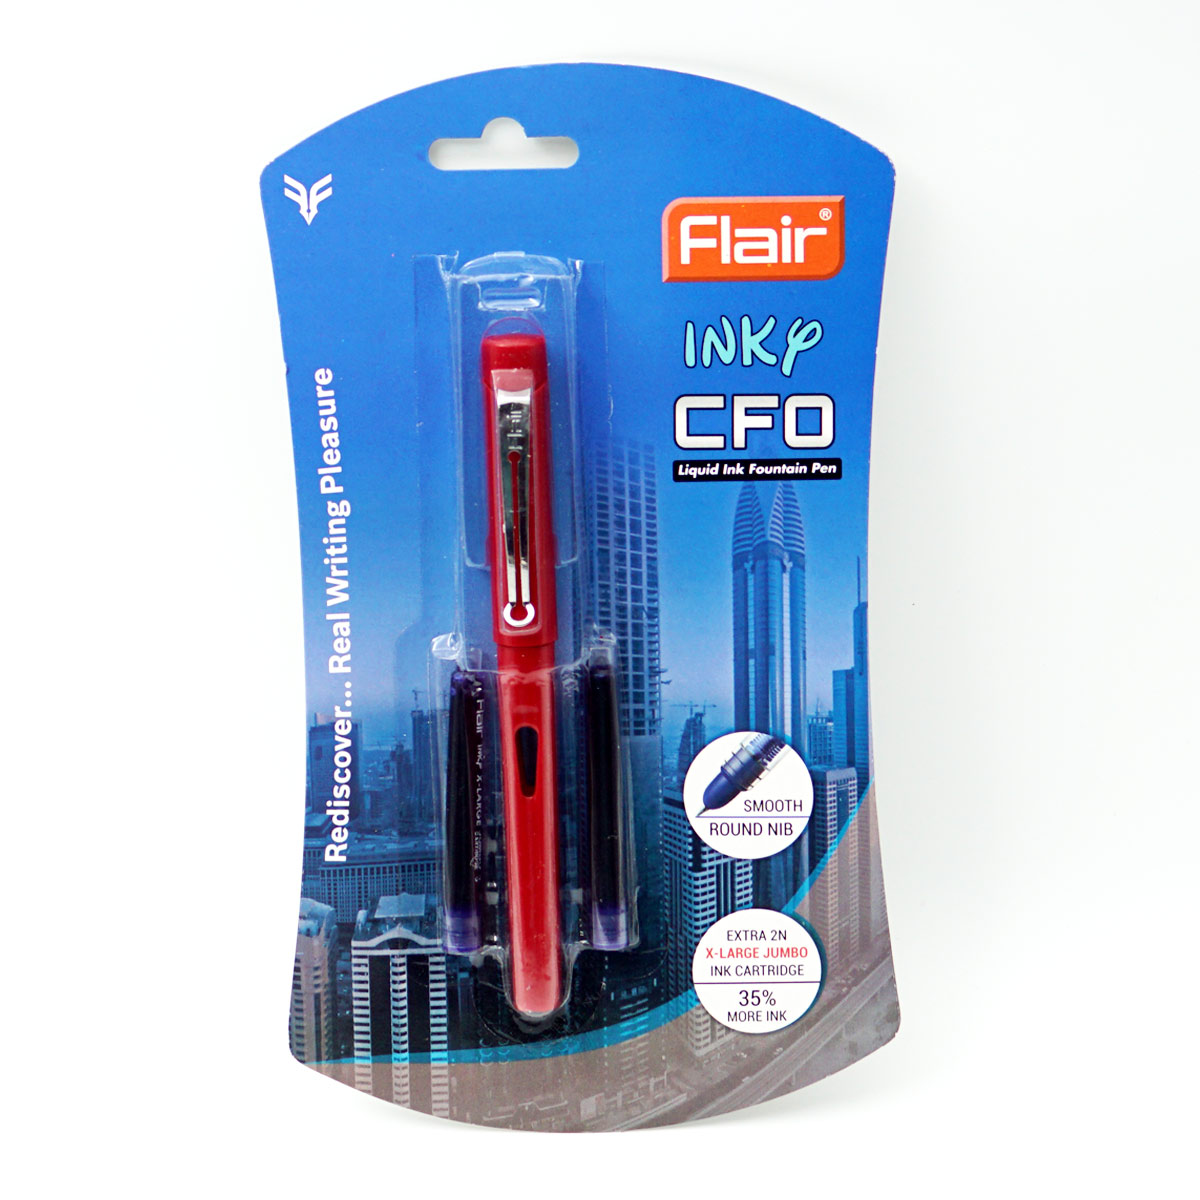 Flair Inky CFO Model:15599 Red Color Body with Cap Type and 2 Ink Catridge Fine Nib Fountain Pen